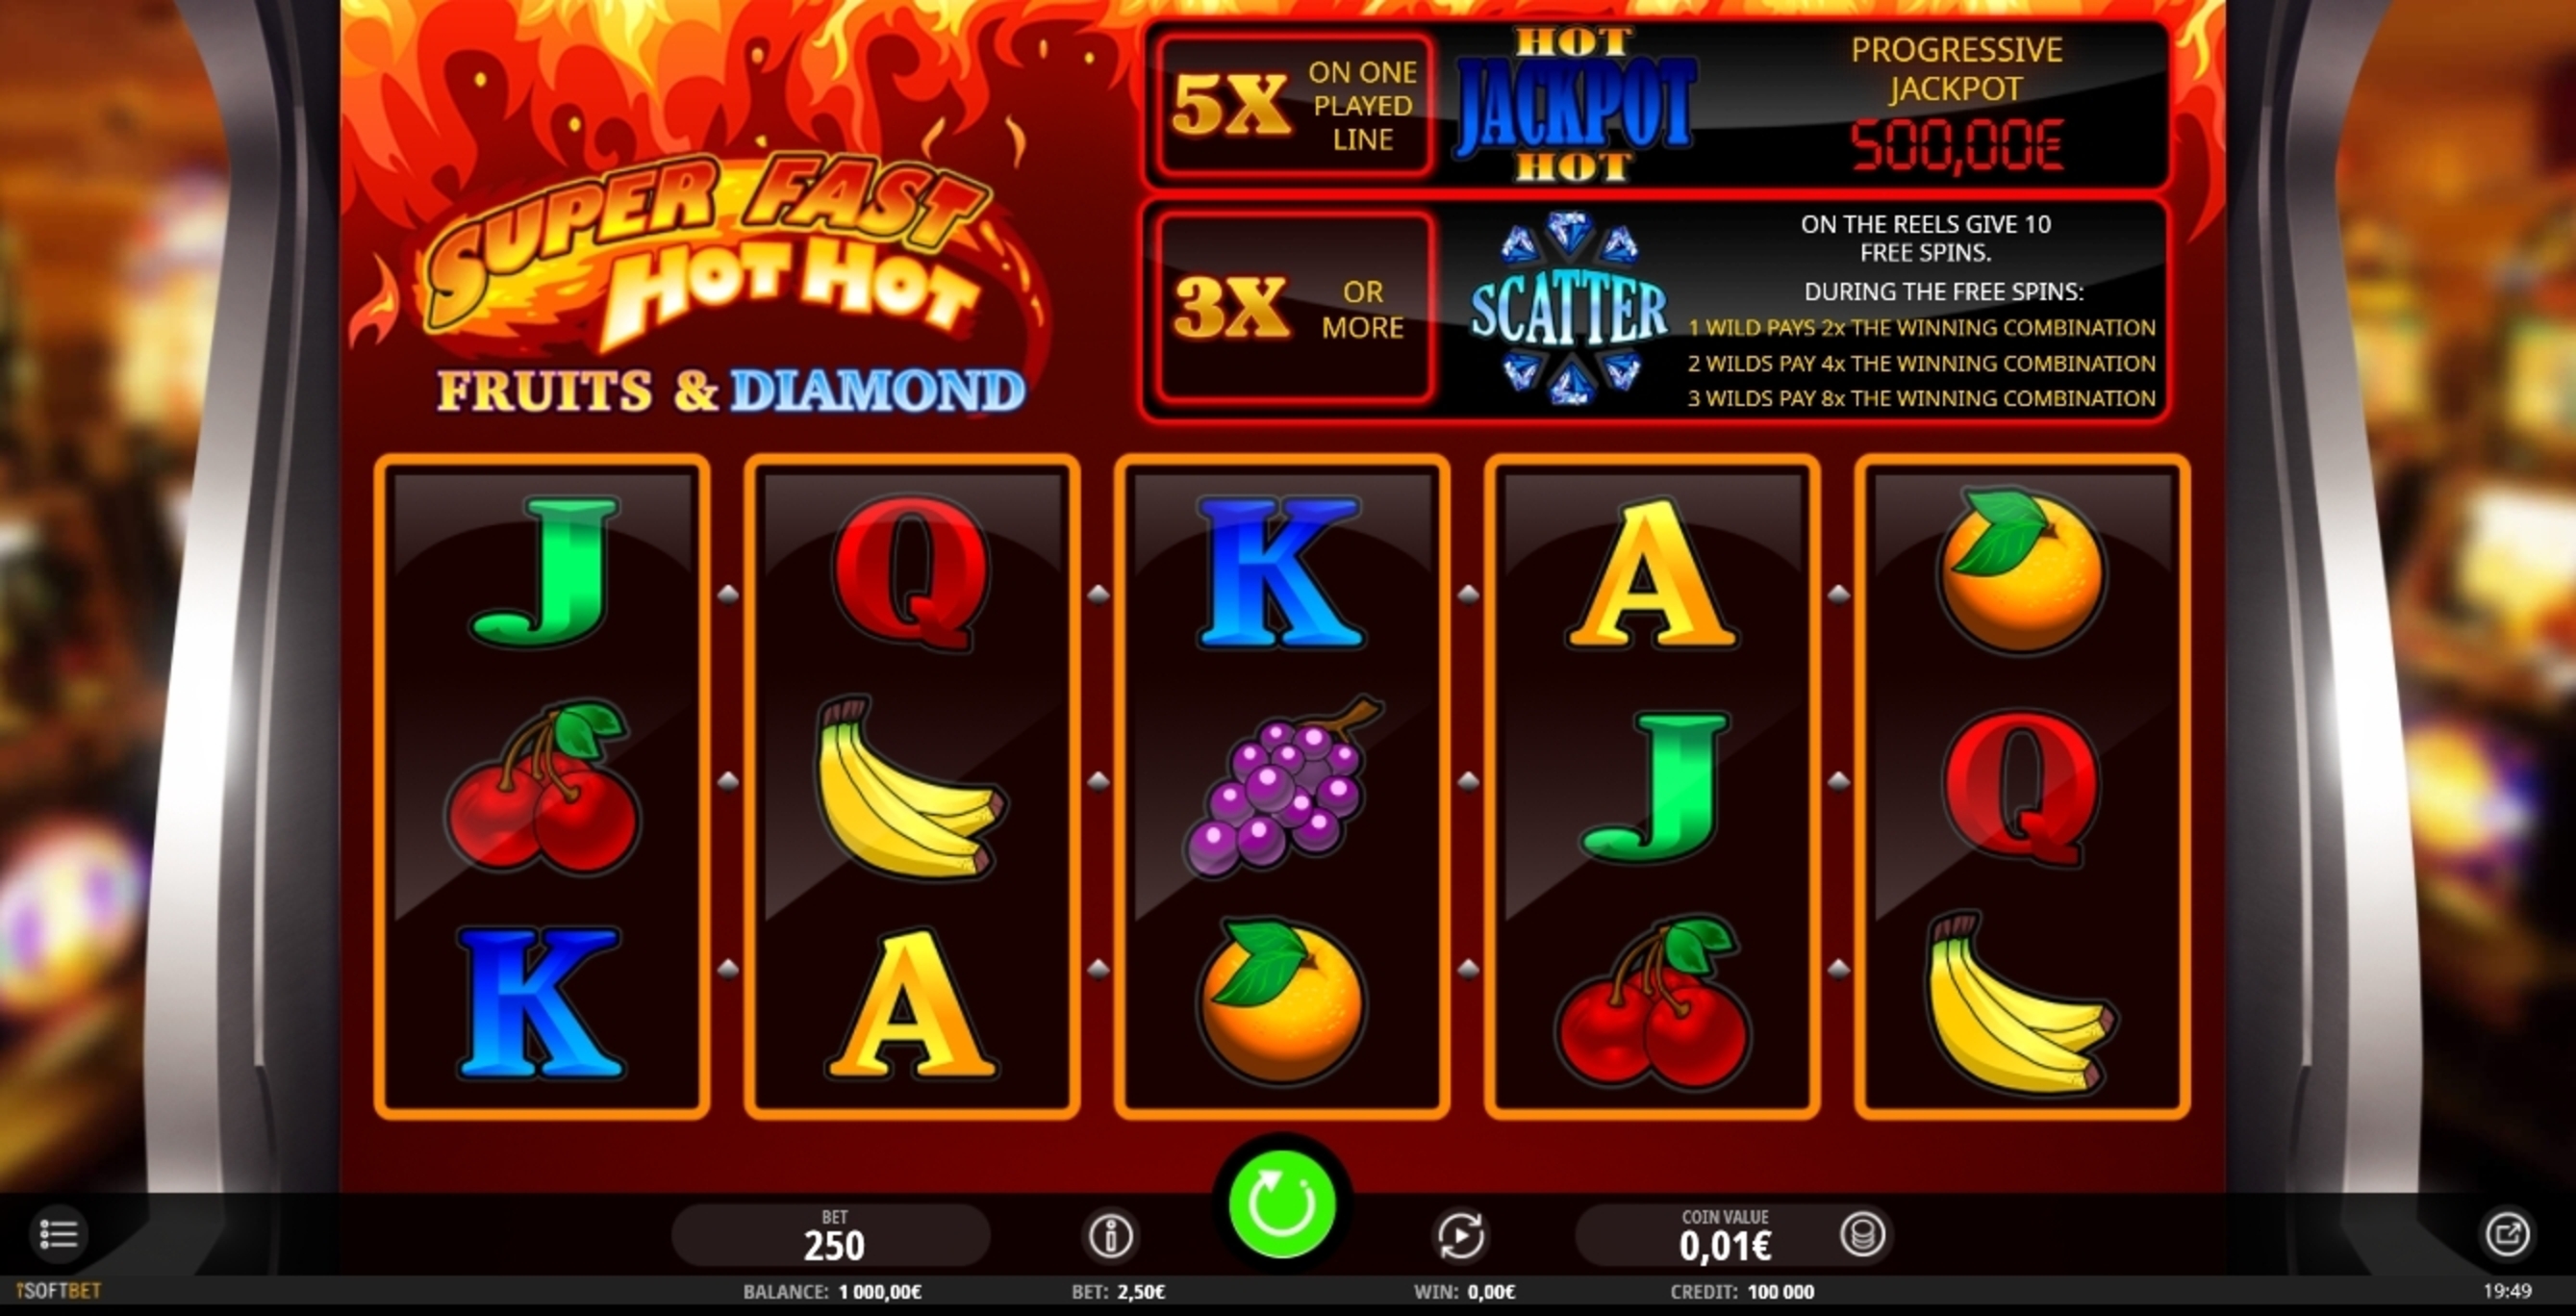 Reels in Super Fast Hot Hot Slot Game by iSoftBet